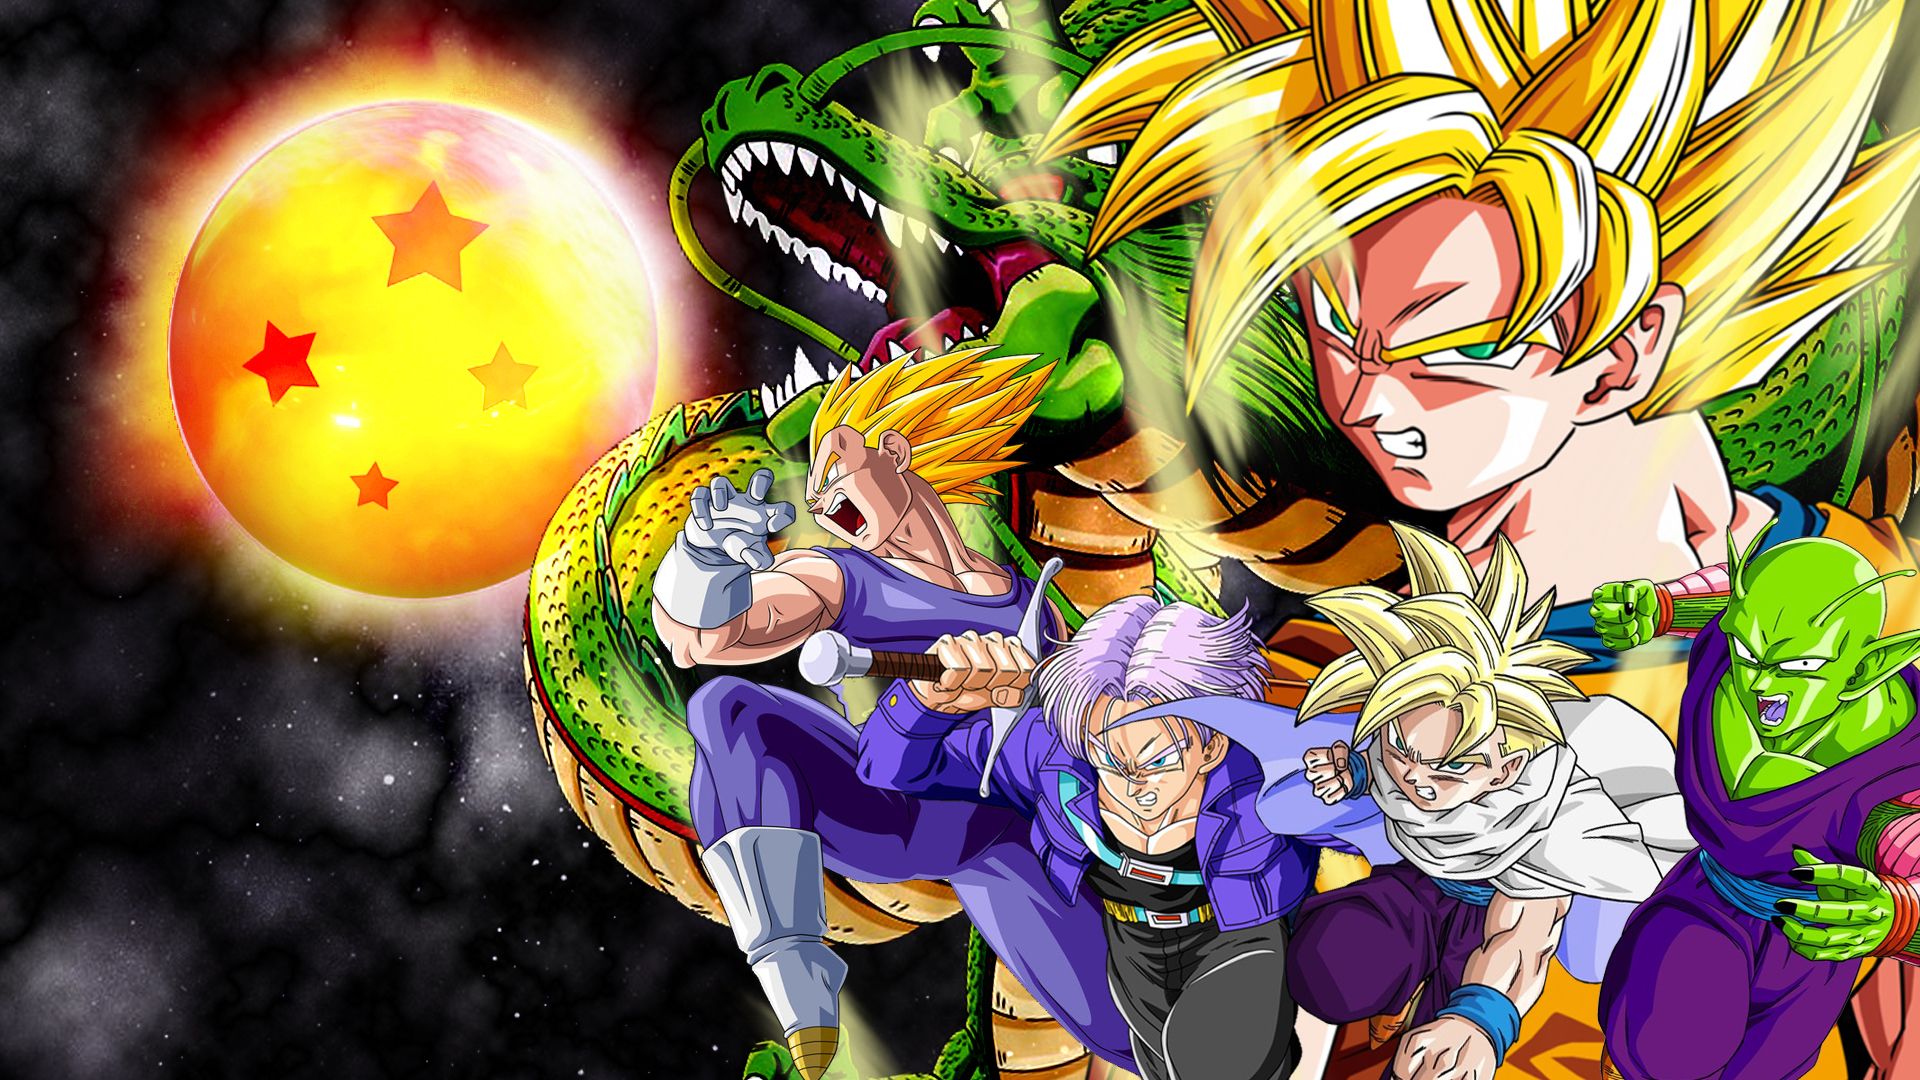 Dragon Ball Z Wallpaper – All Characters in High Resolution | HD ...